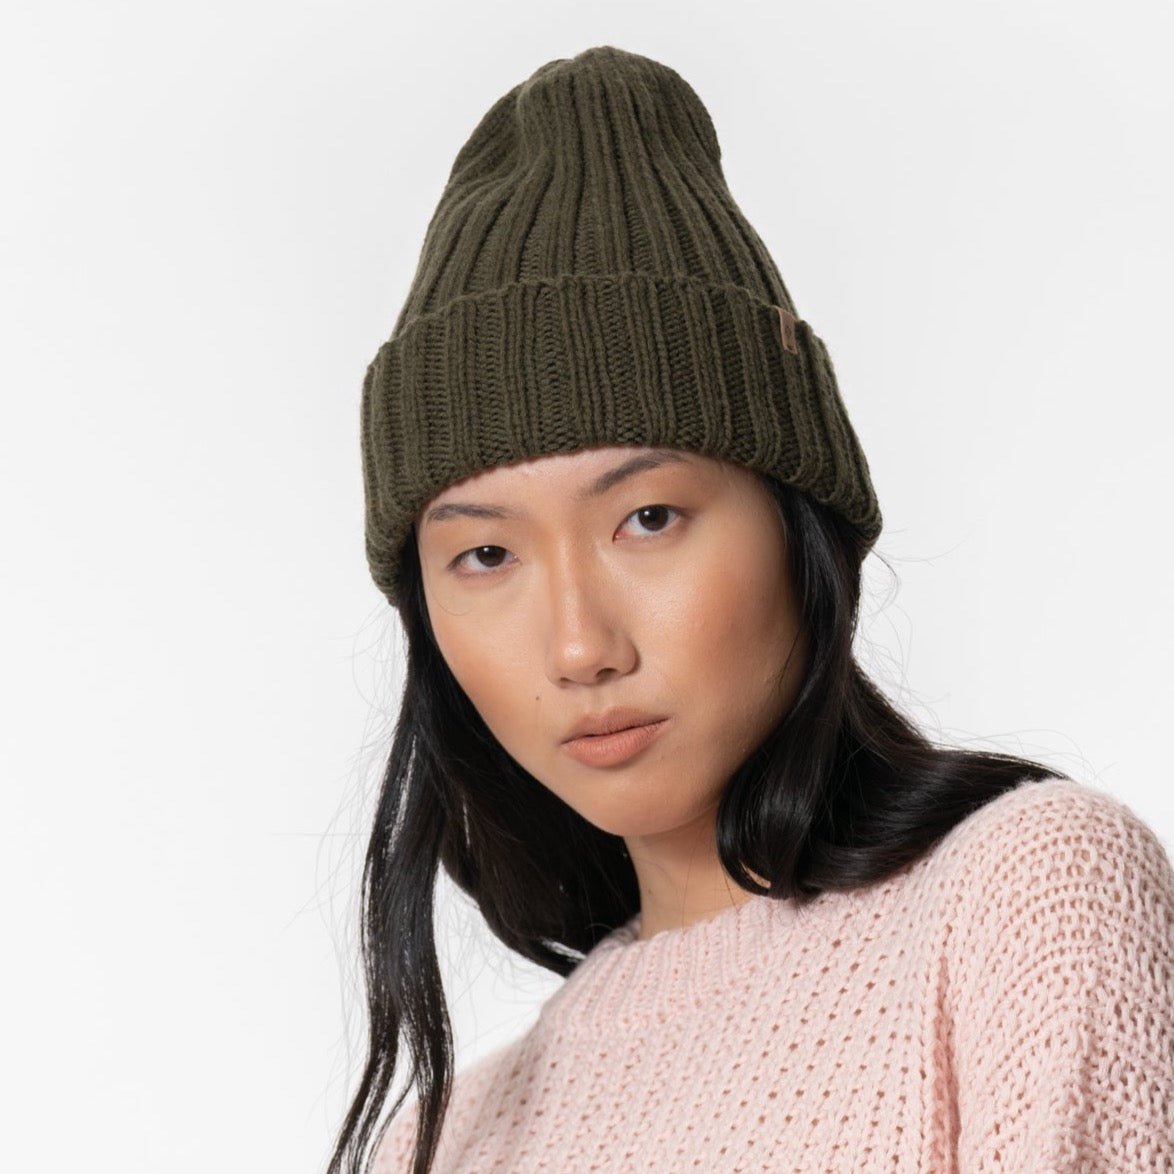 A dark green cuffed hat with thick ribbed design and decrease detail at the top. The Merino Thick Rib Hat in Olive Green is designed by Dinadi and hand knitted in Kathmandu, Nepal.